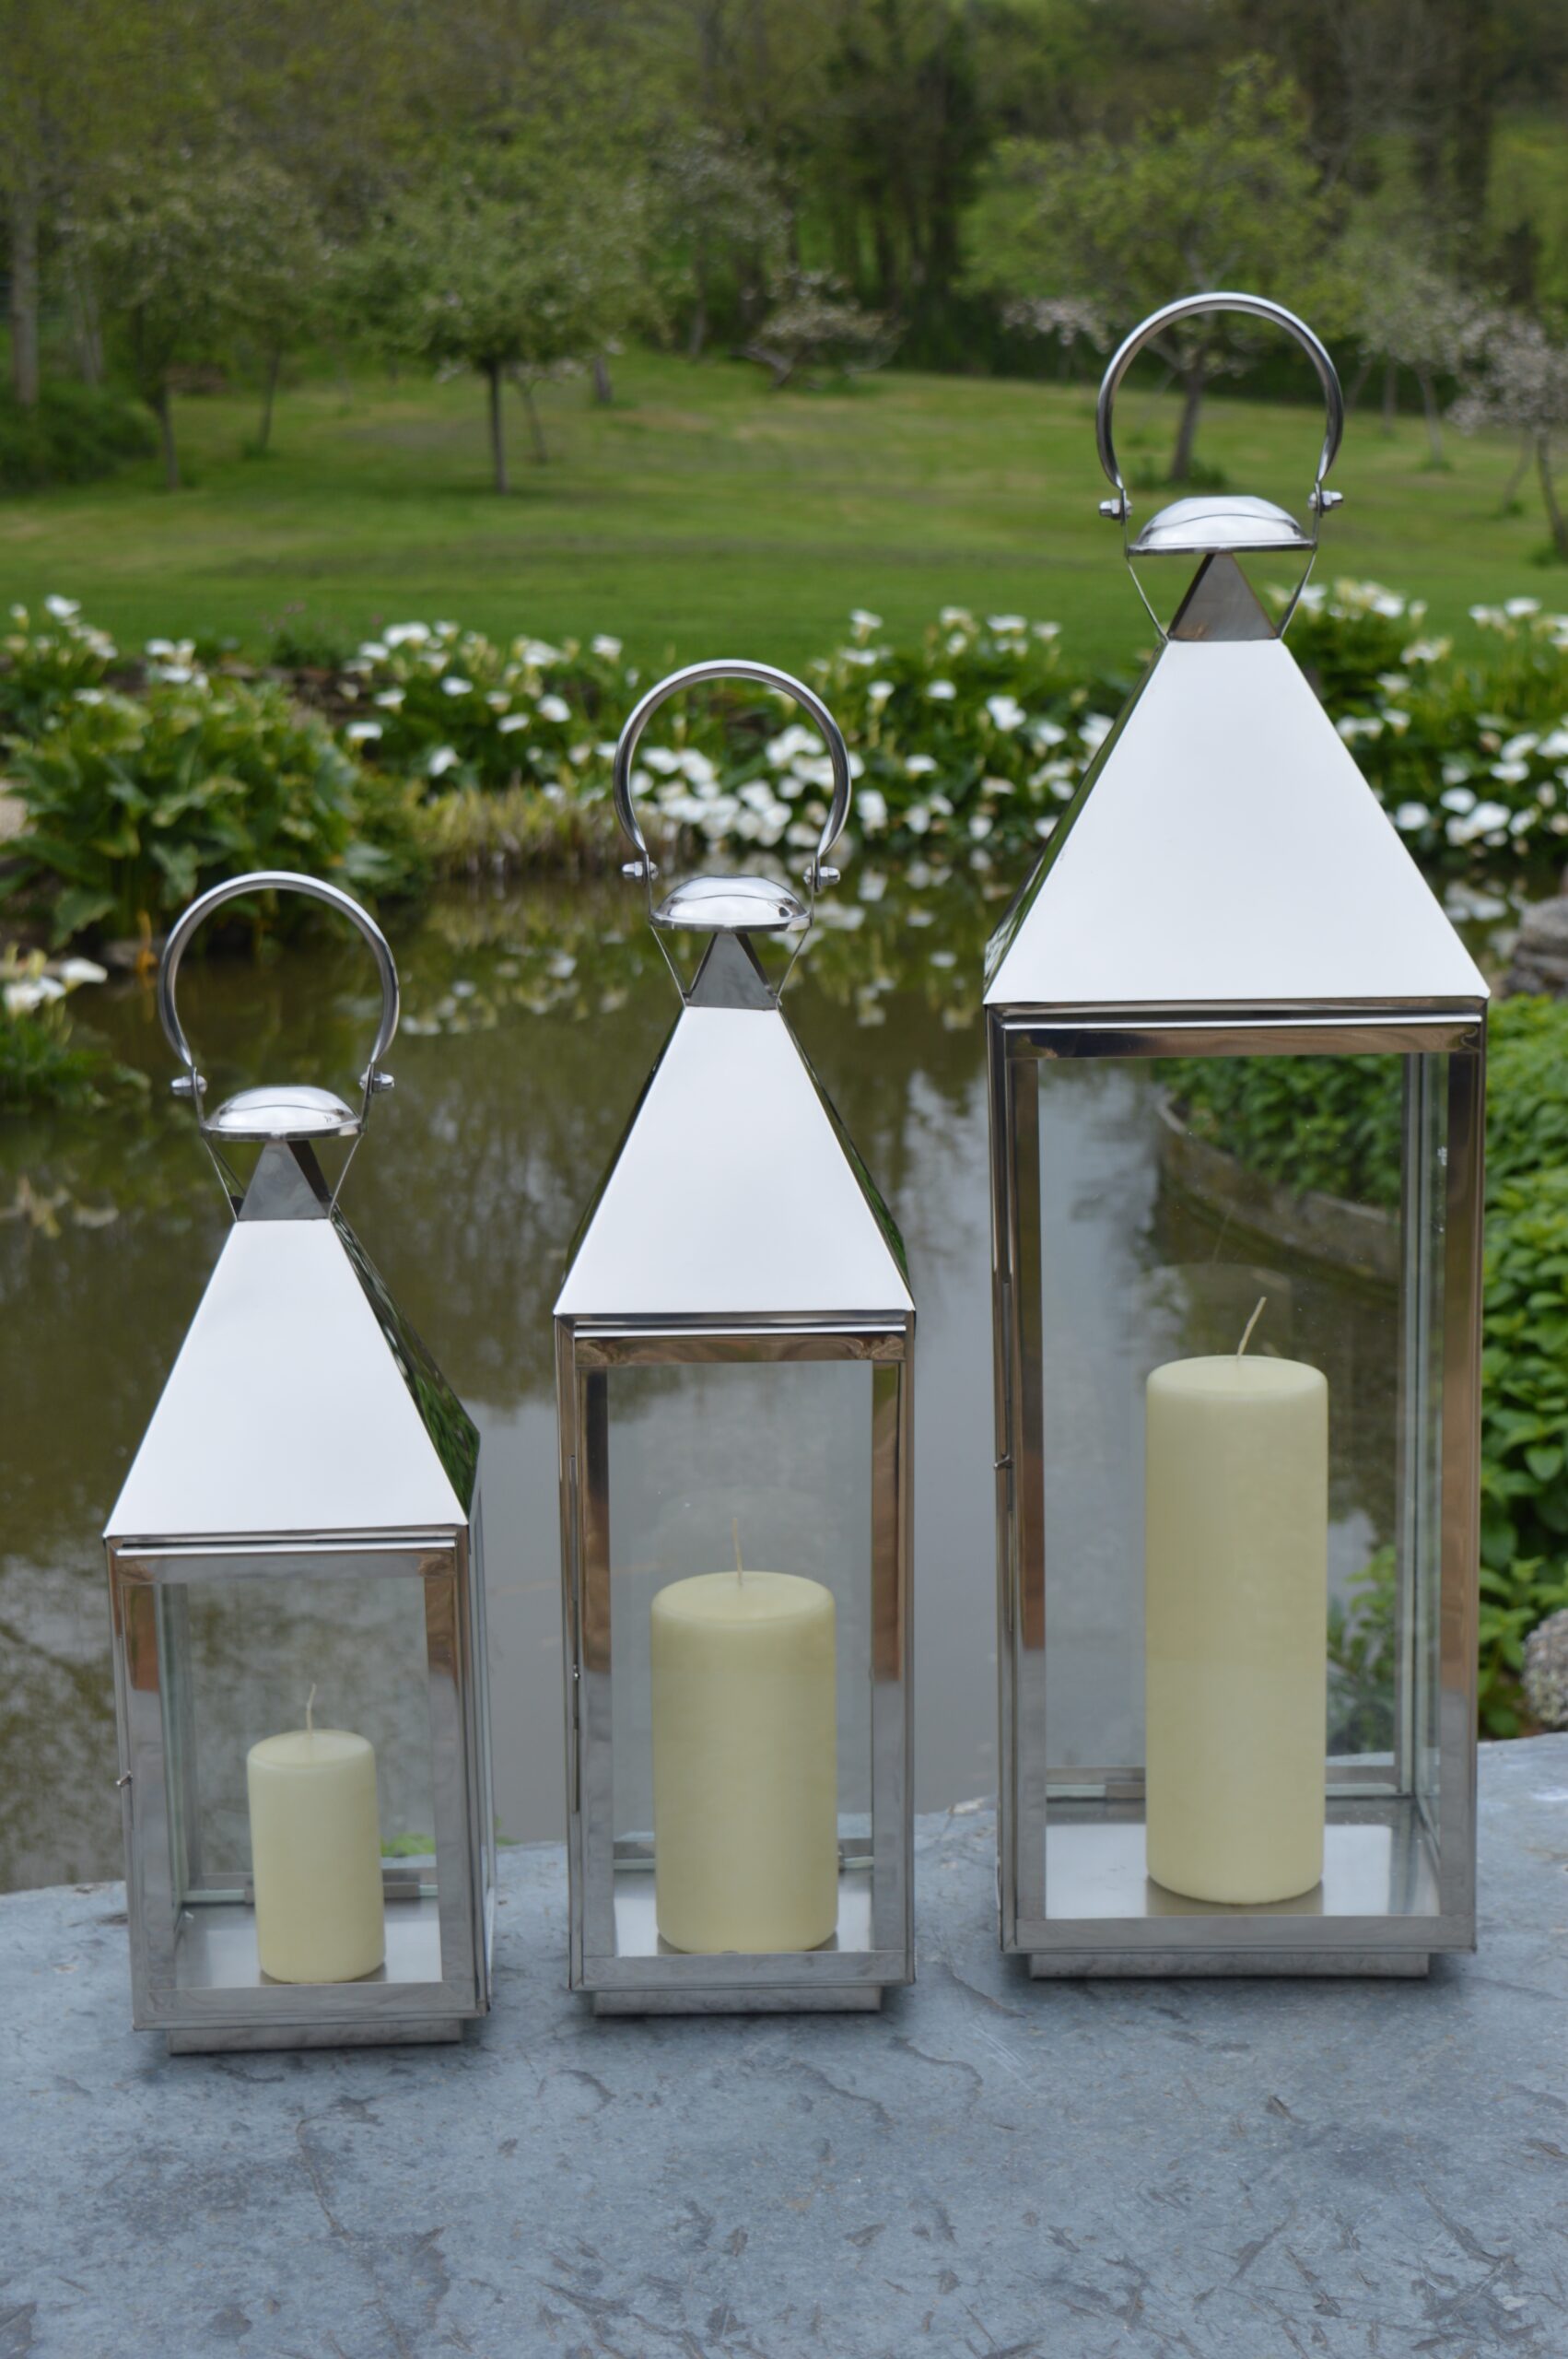 Set 3 stainless steel candle lanterns by pond surrounded by flowers